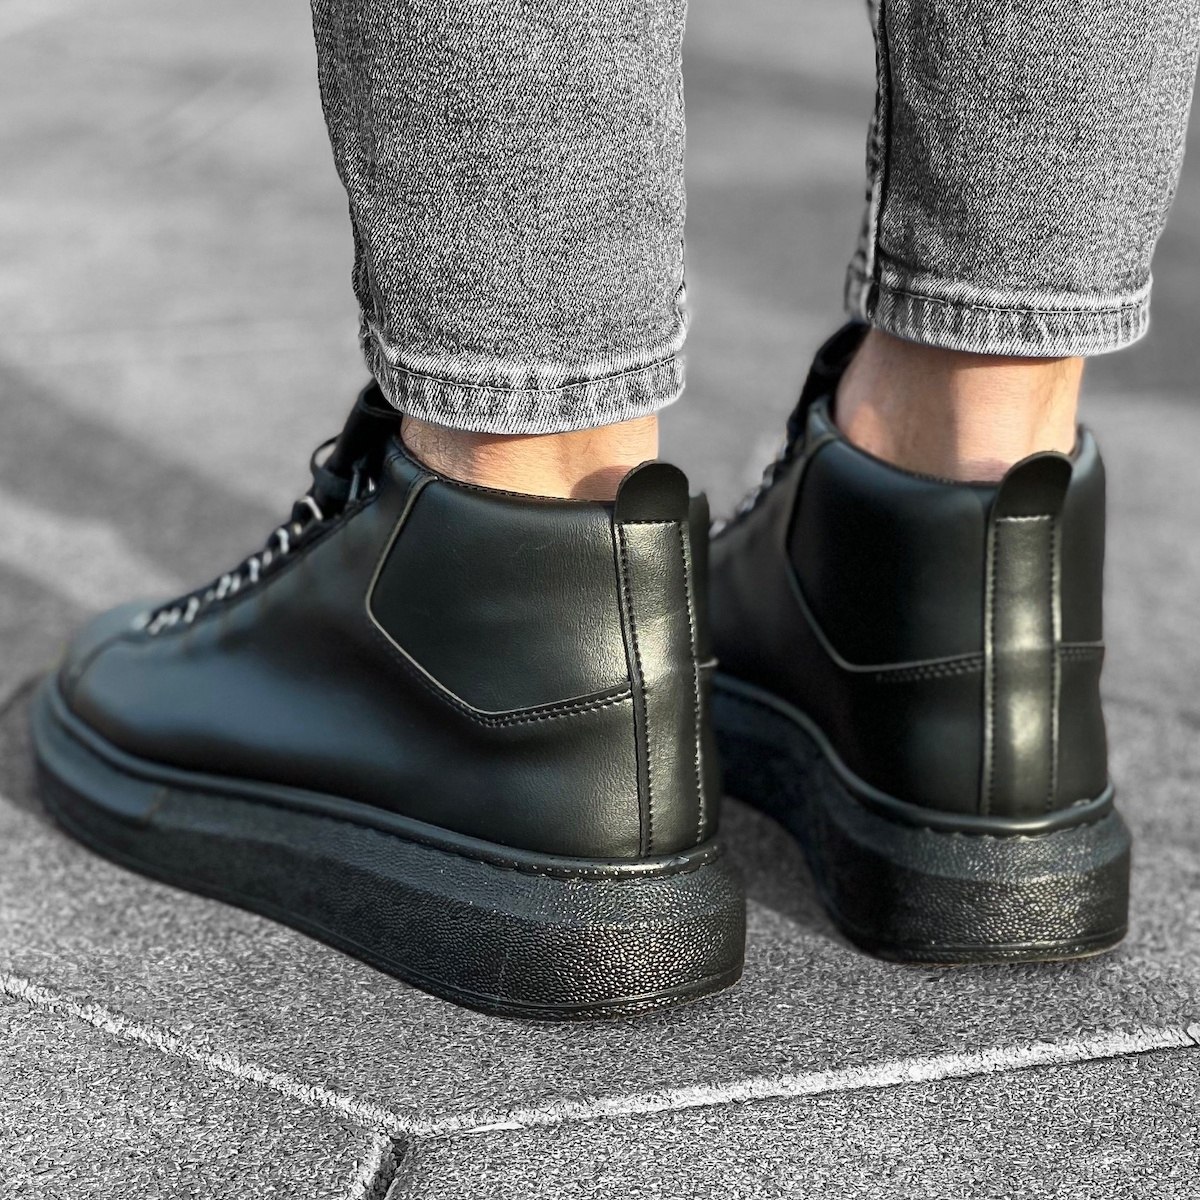 Hype Sole Mox High Top Sneakers In Full Black | Martin Valen